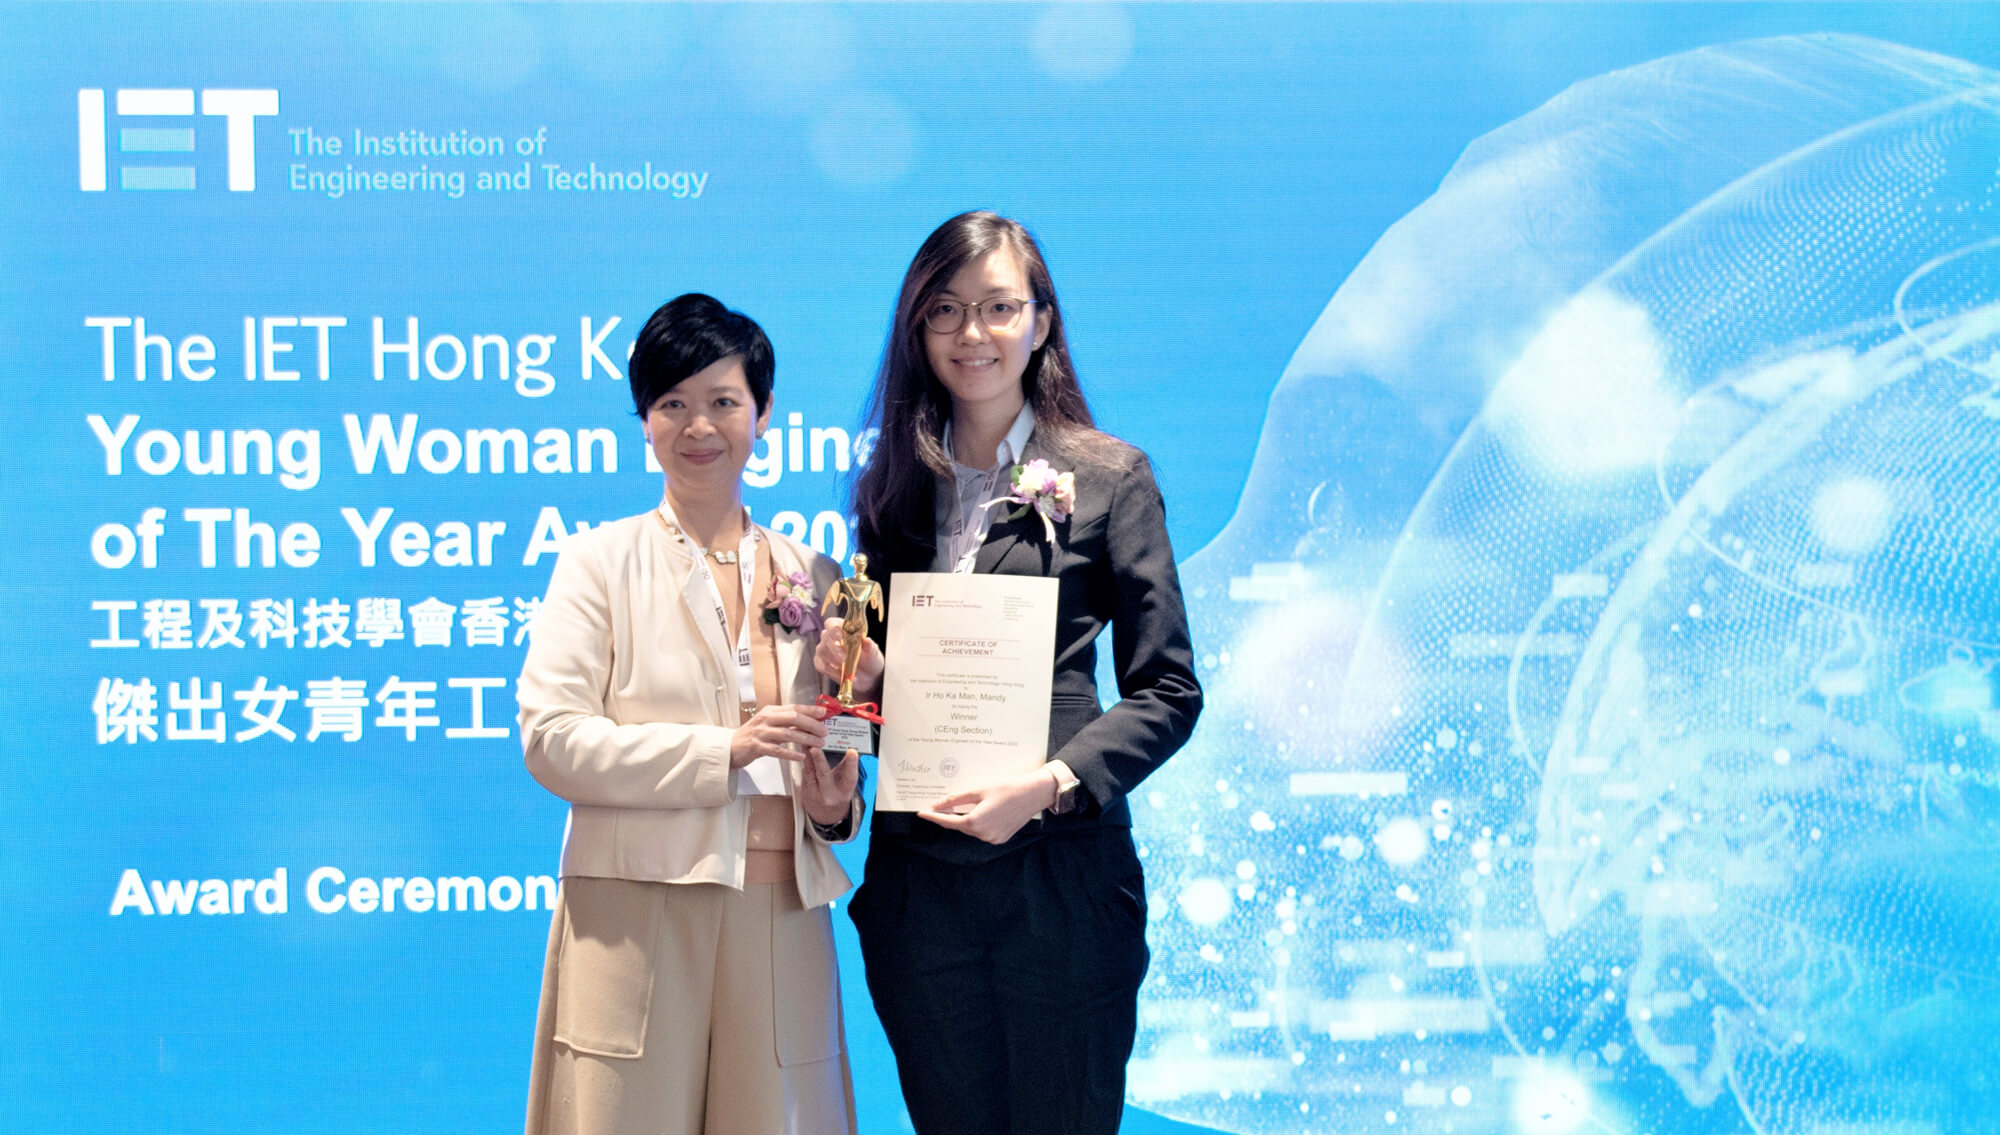 Alumna Mandy HO received the IET Young Woman Engineer of the Year Award 2022